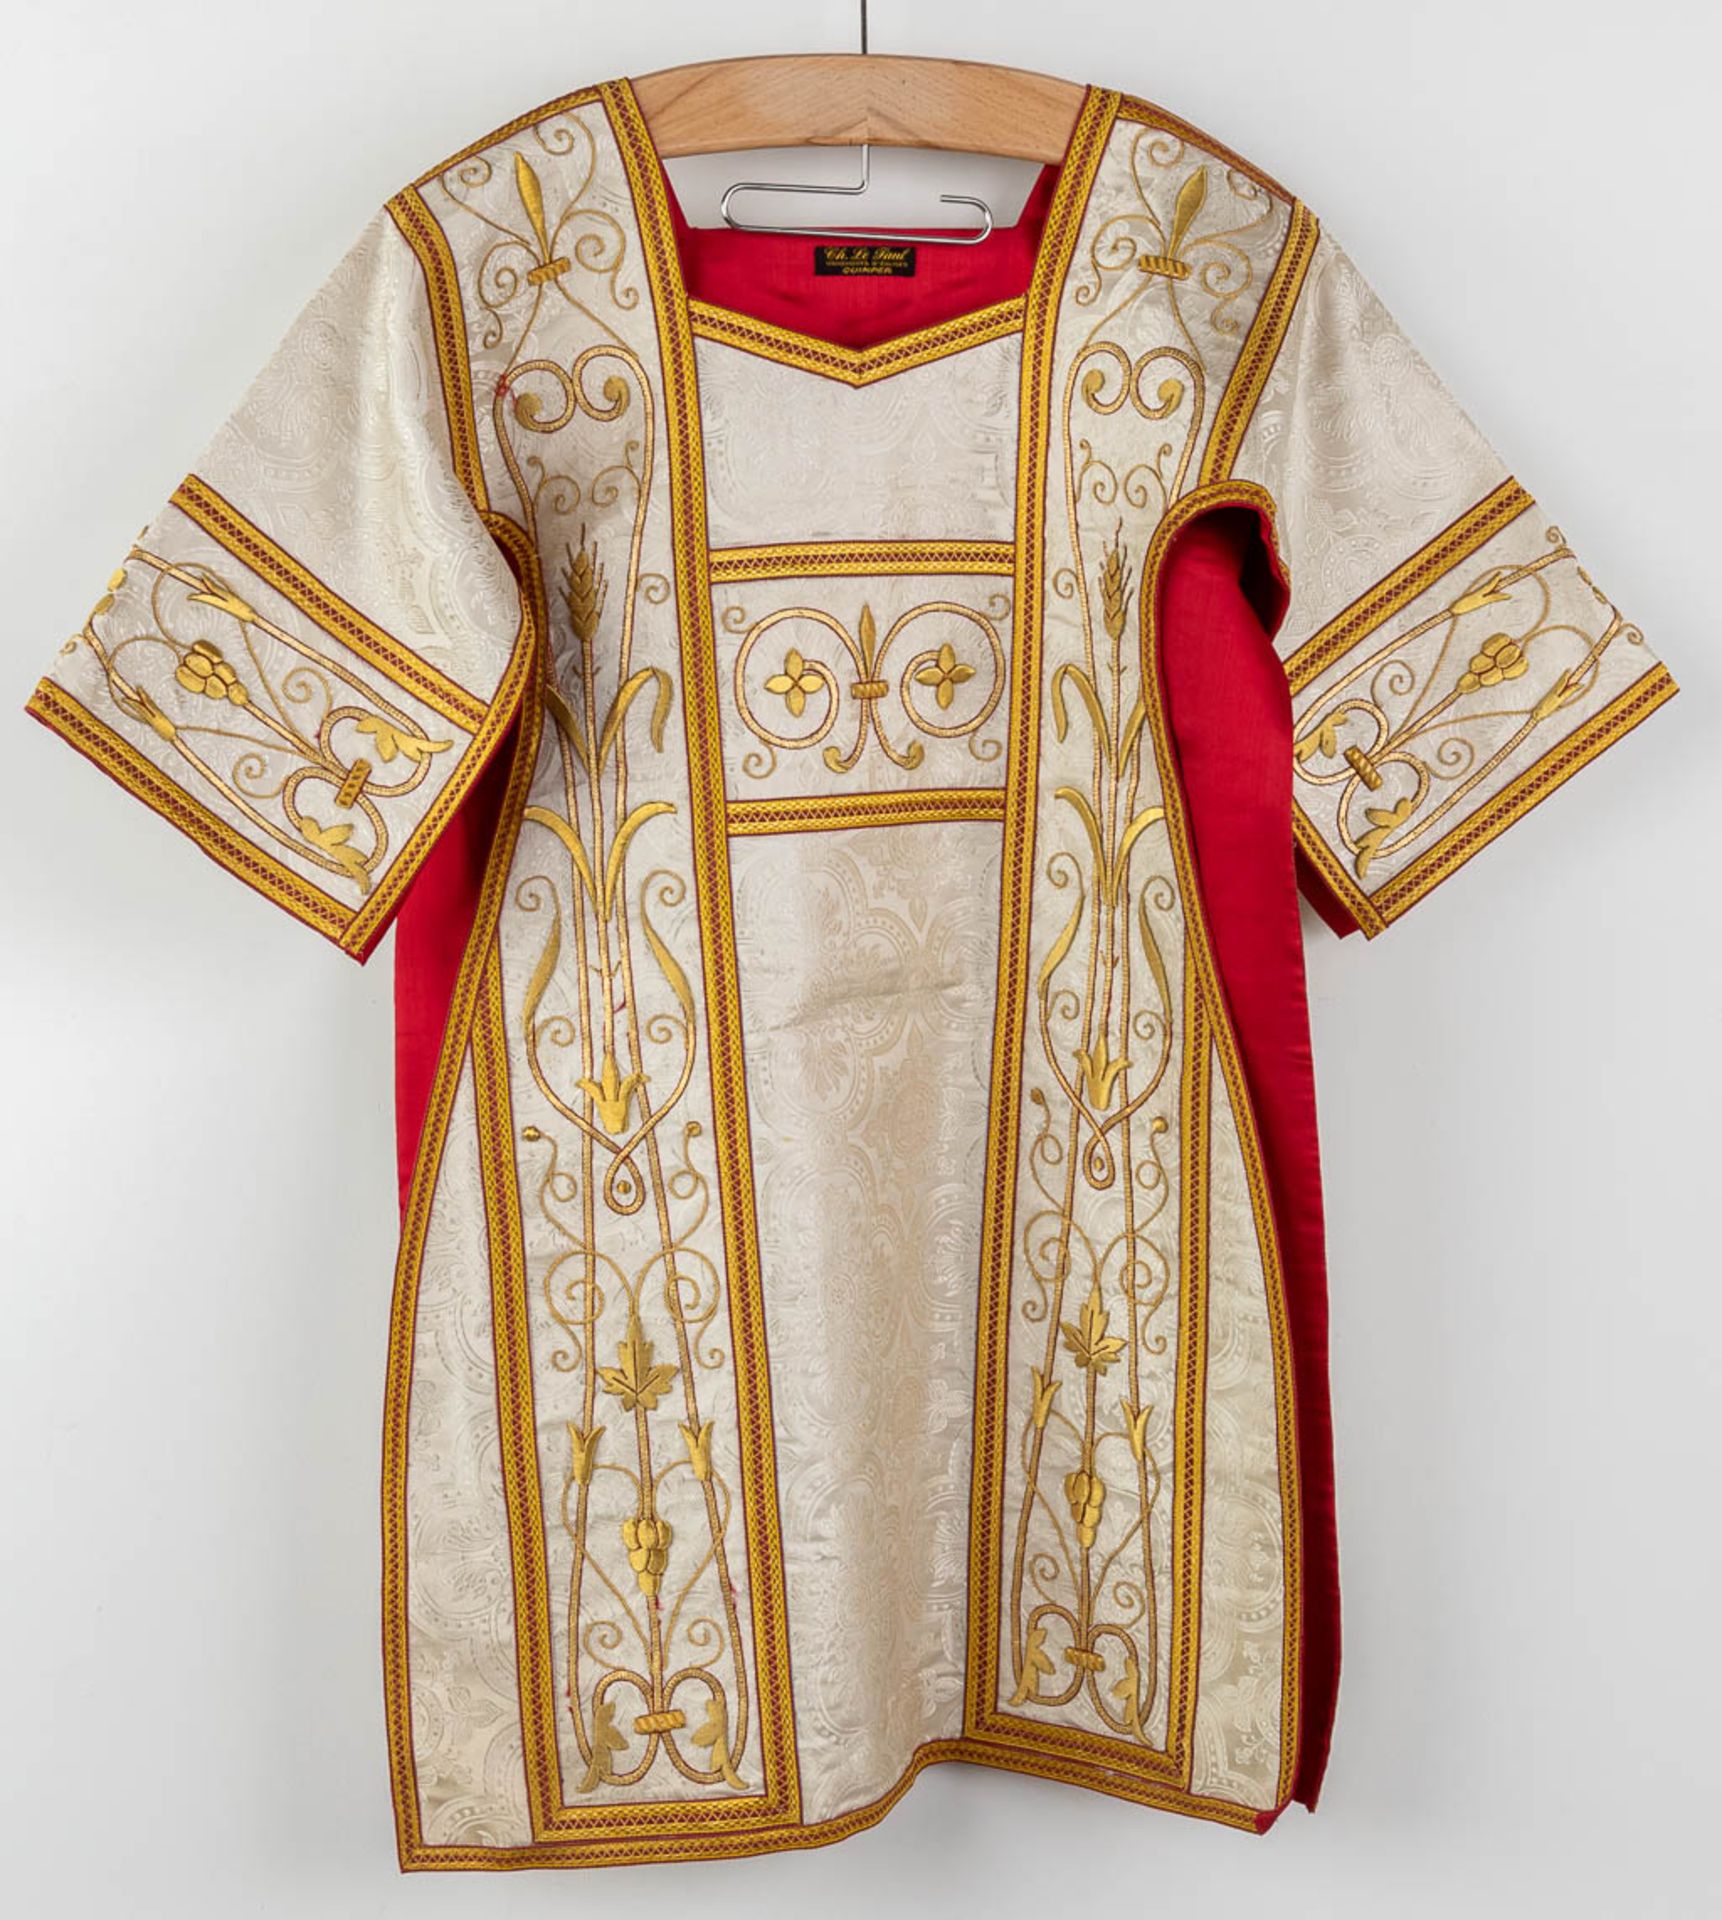 A matching set of Liturgical robes, 4 dalmatics, maniples and stola. - Image 5 of 17